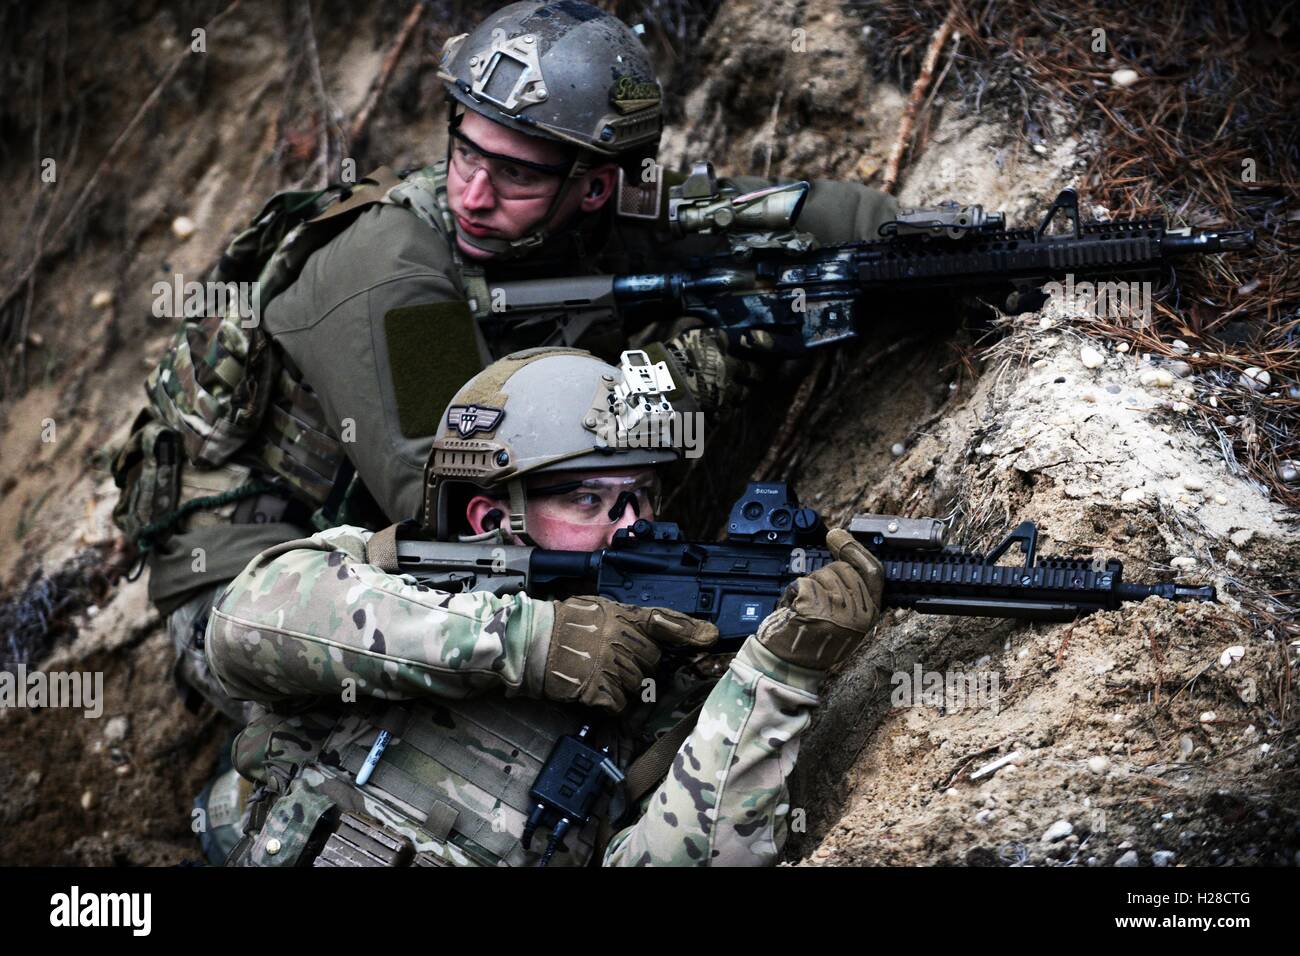 U.S. Air National Guard special operation airmen during live-fire training April 9, 2015 in Westhampton Beach, New York. Stock Photo